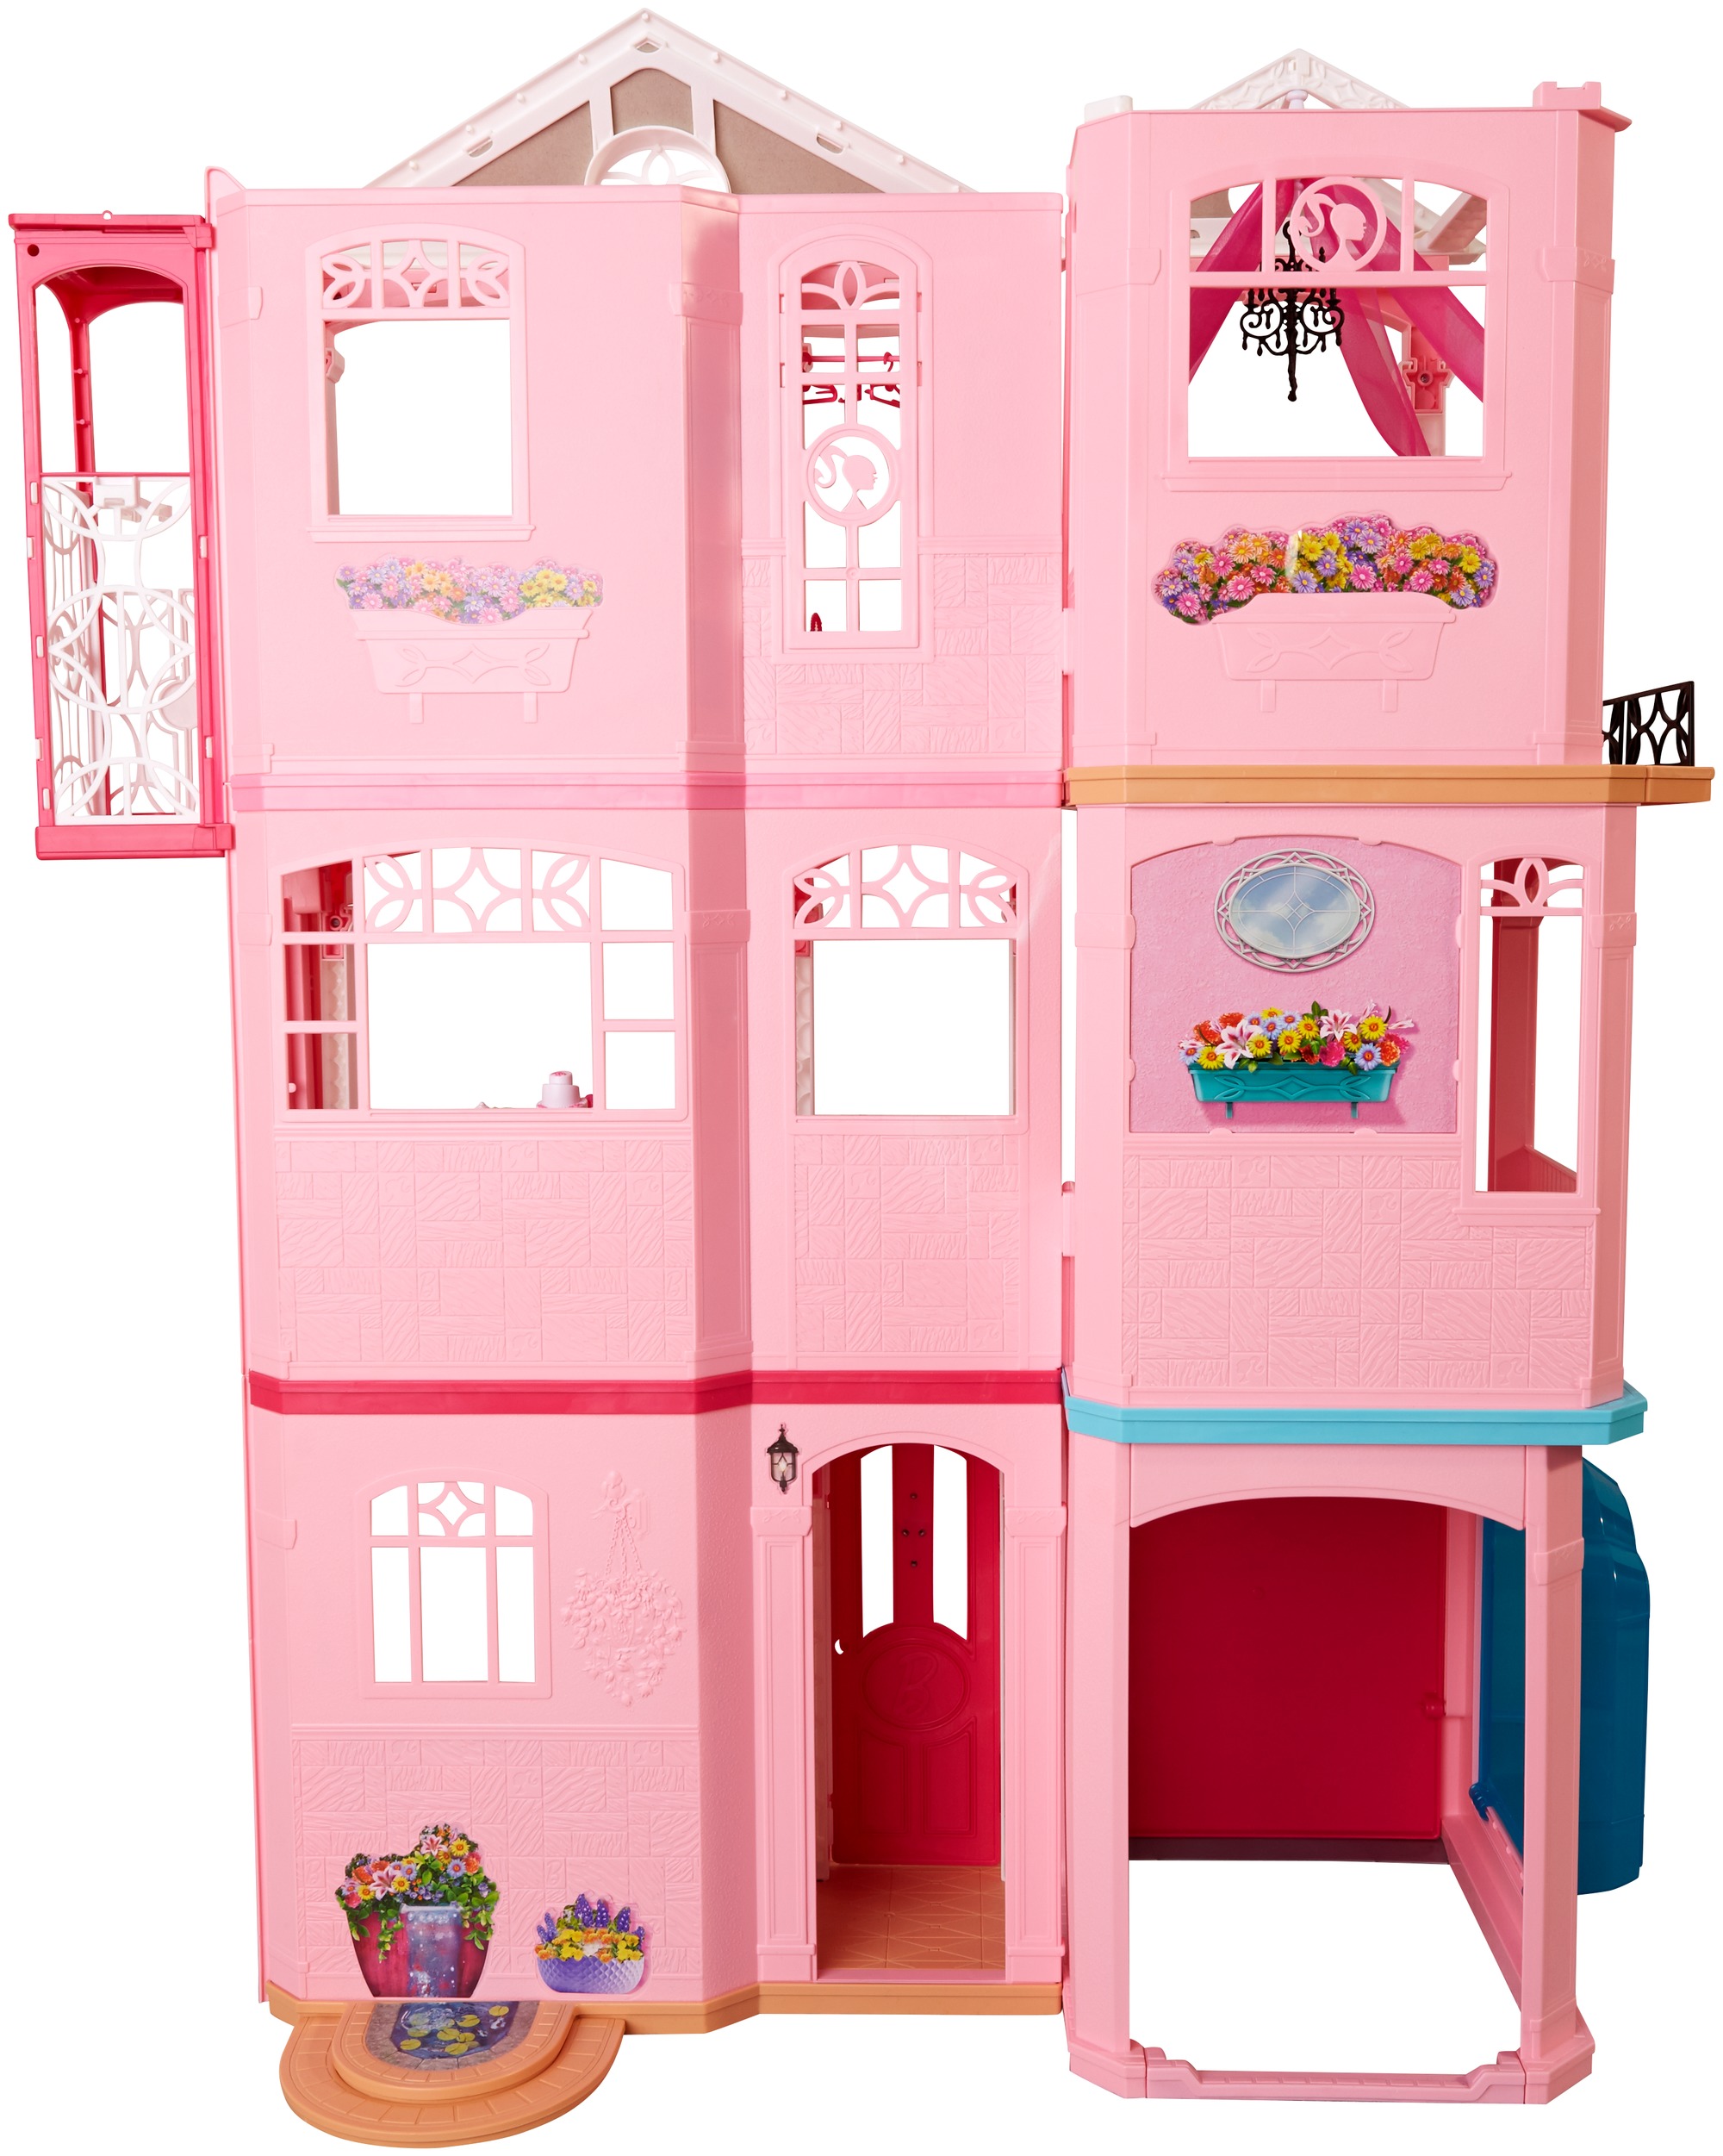 Barbie Estate DreamHouse Playset with 70+ Accessory Pieces - image 5 of 6